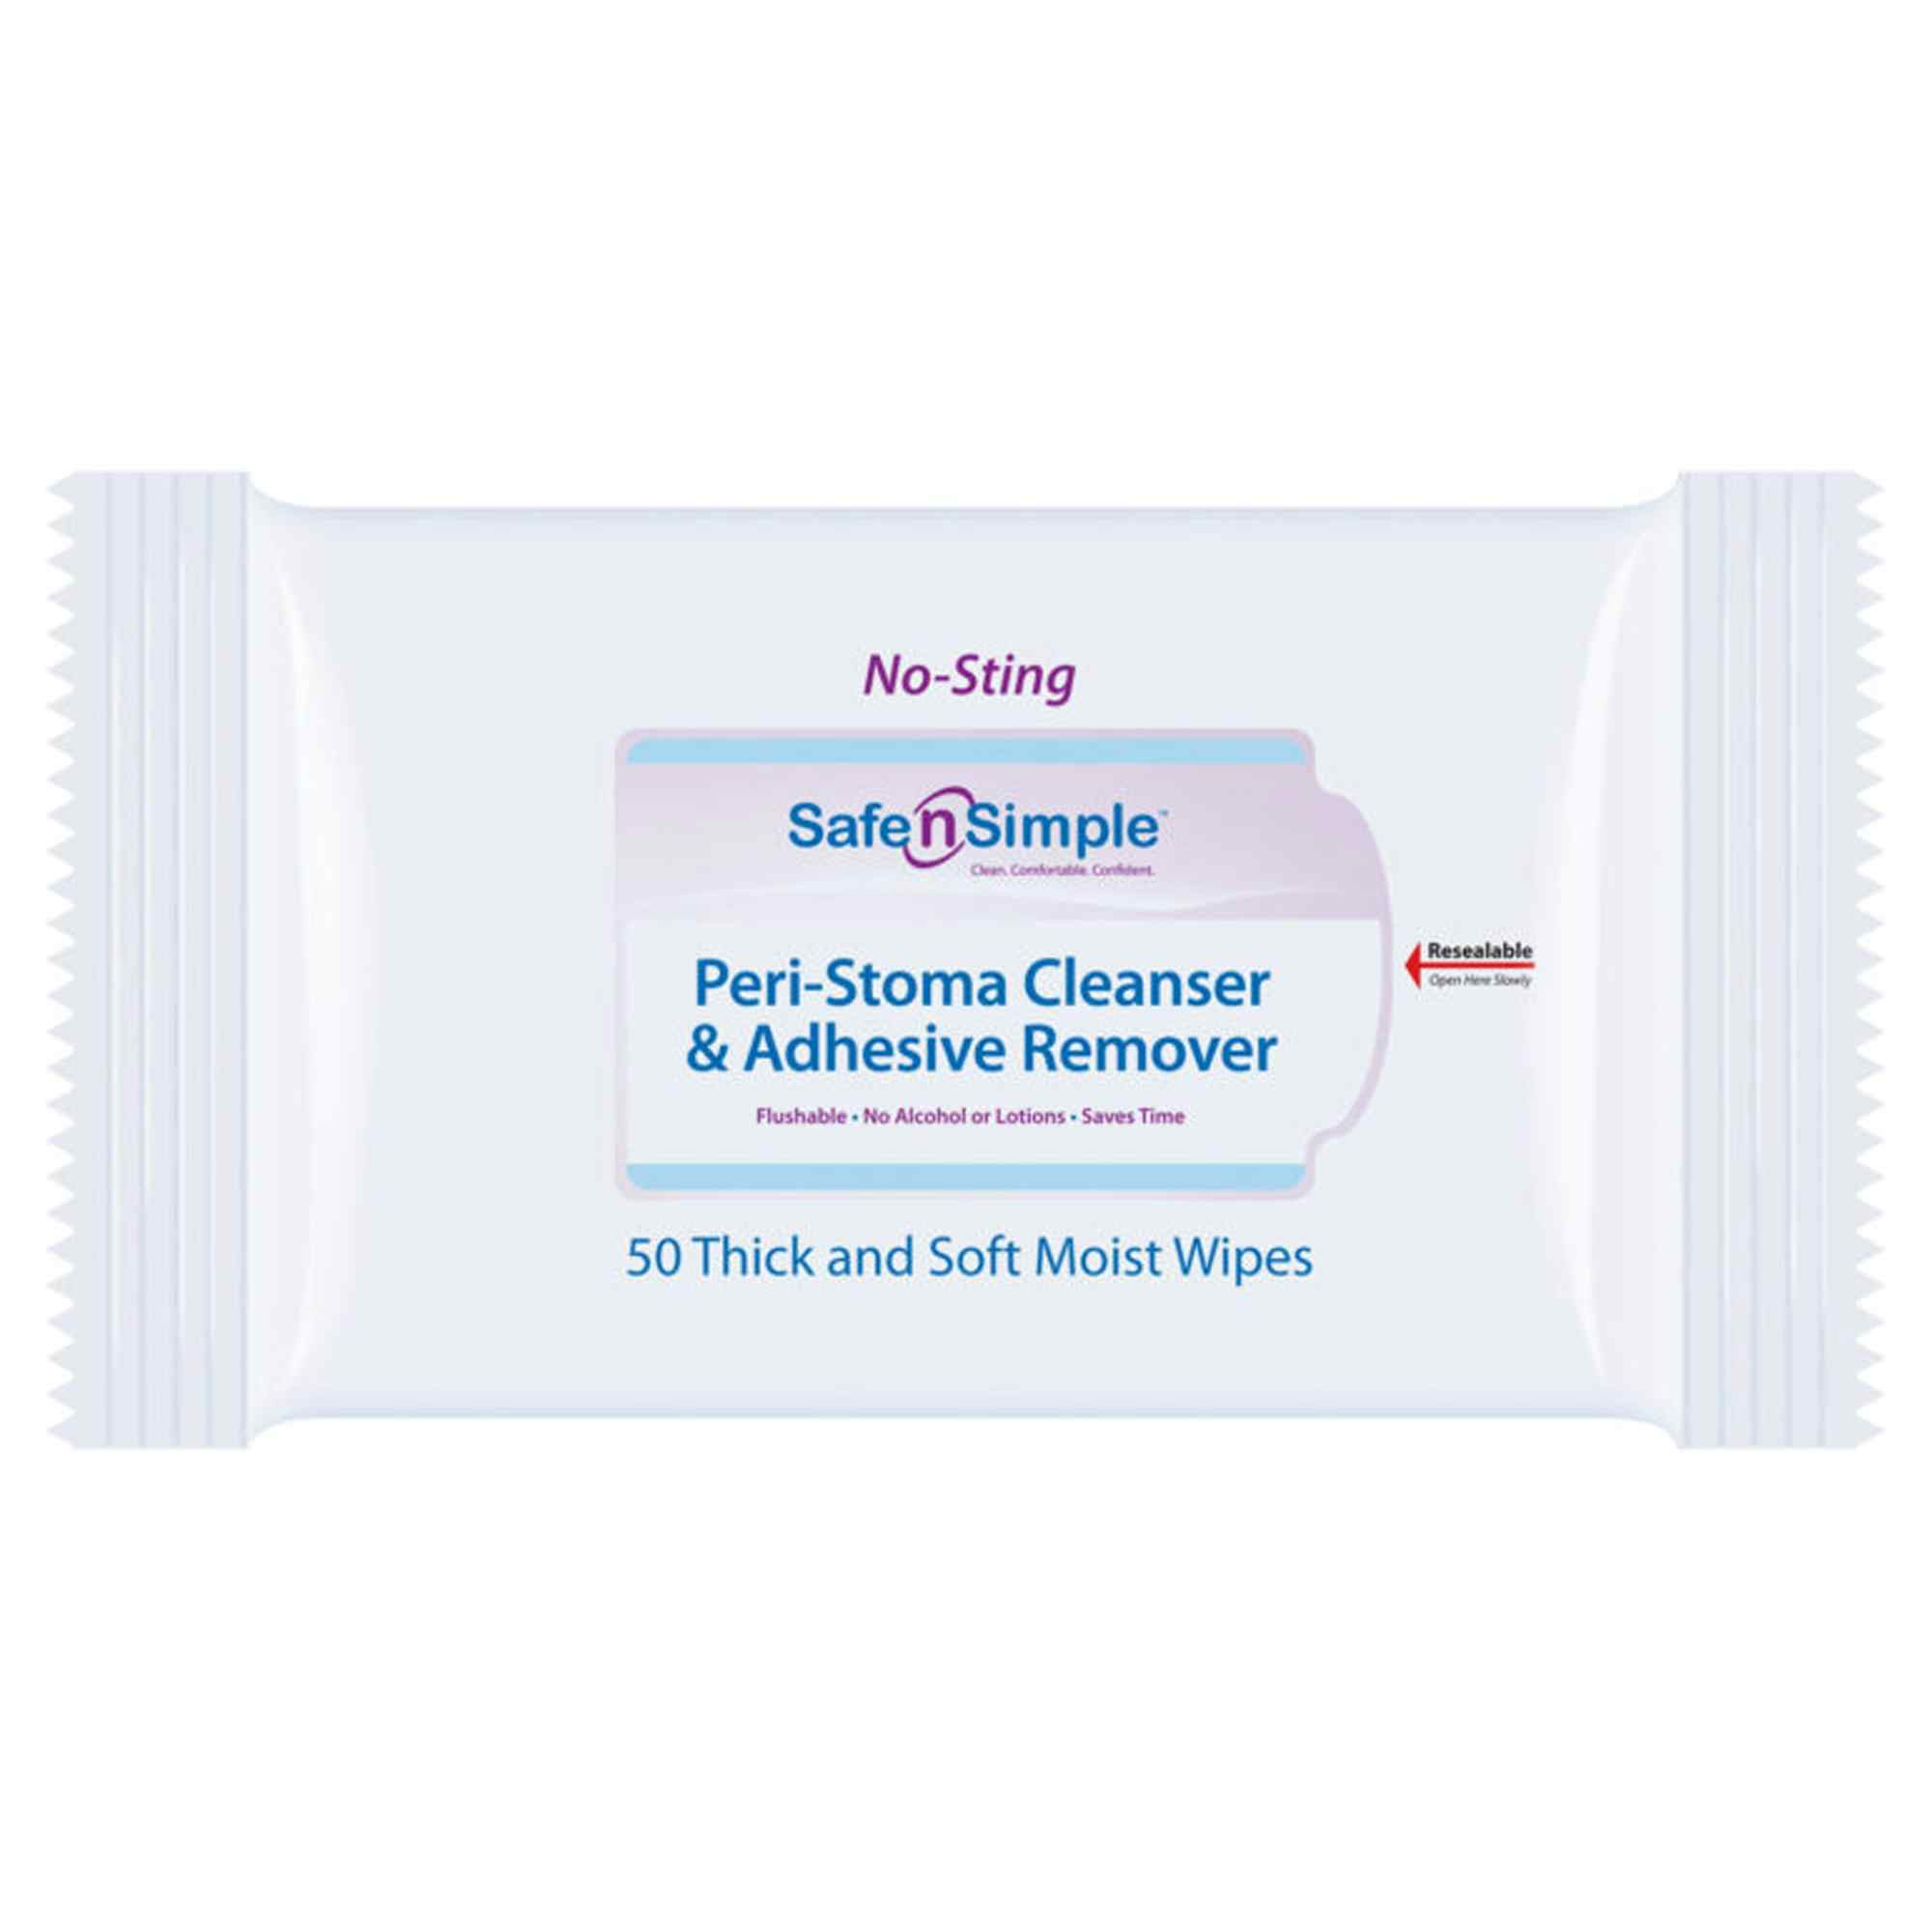 Safe n Simple Peri-Stoma Cleanser & Adhesive Remover Wipes